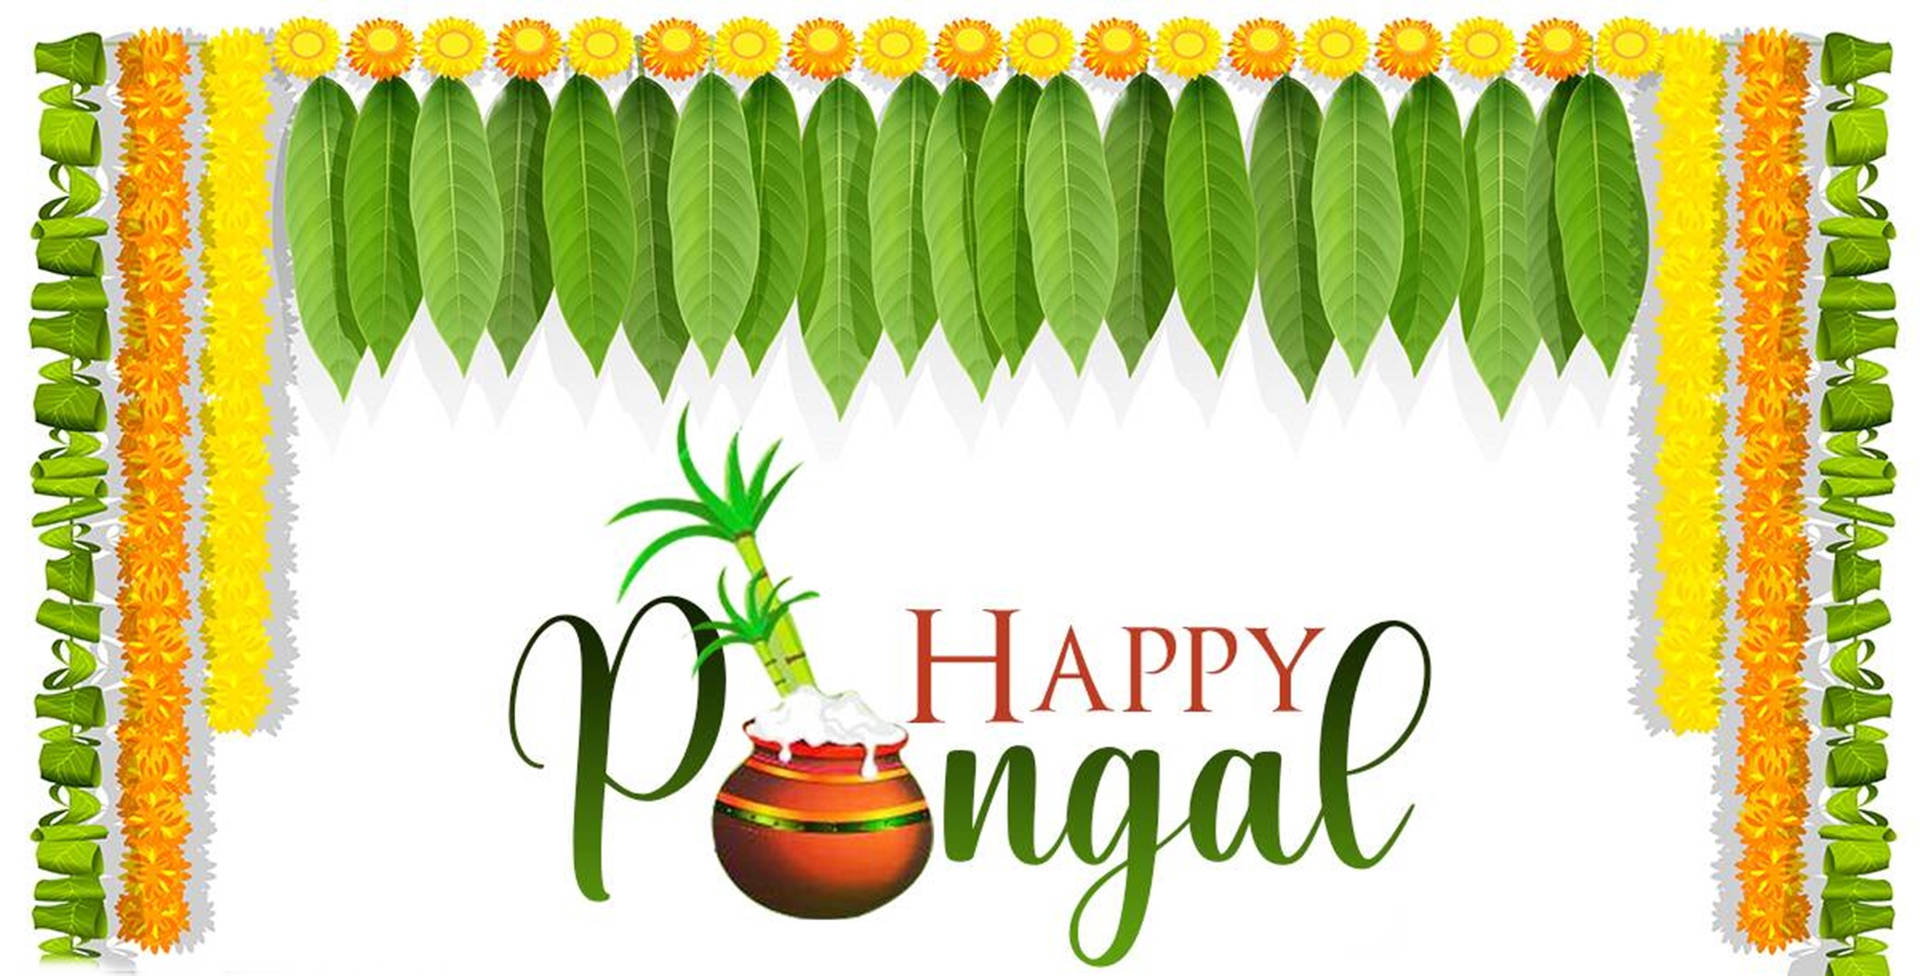 Happy Pongal Palm Leaves Wallpaper